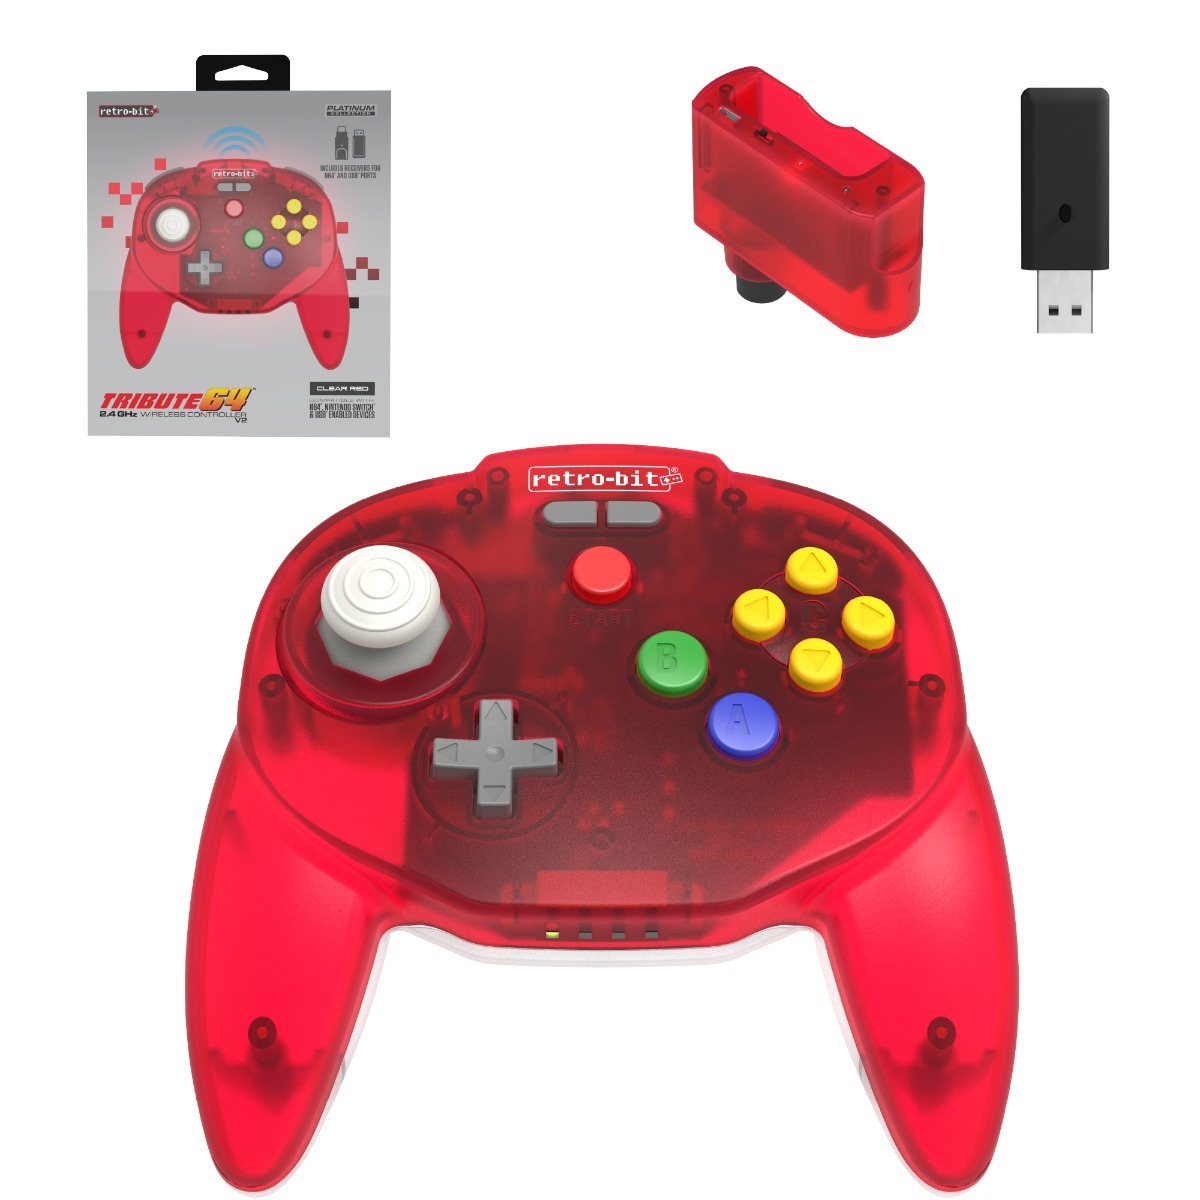 Tribute64 2.4 GHz Wireless Controller - Clear Red